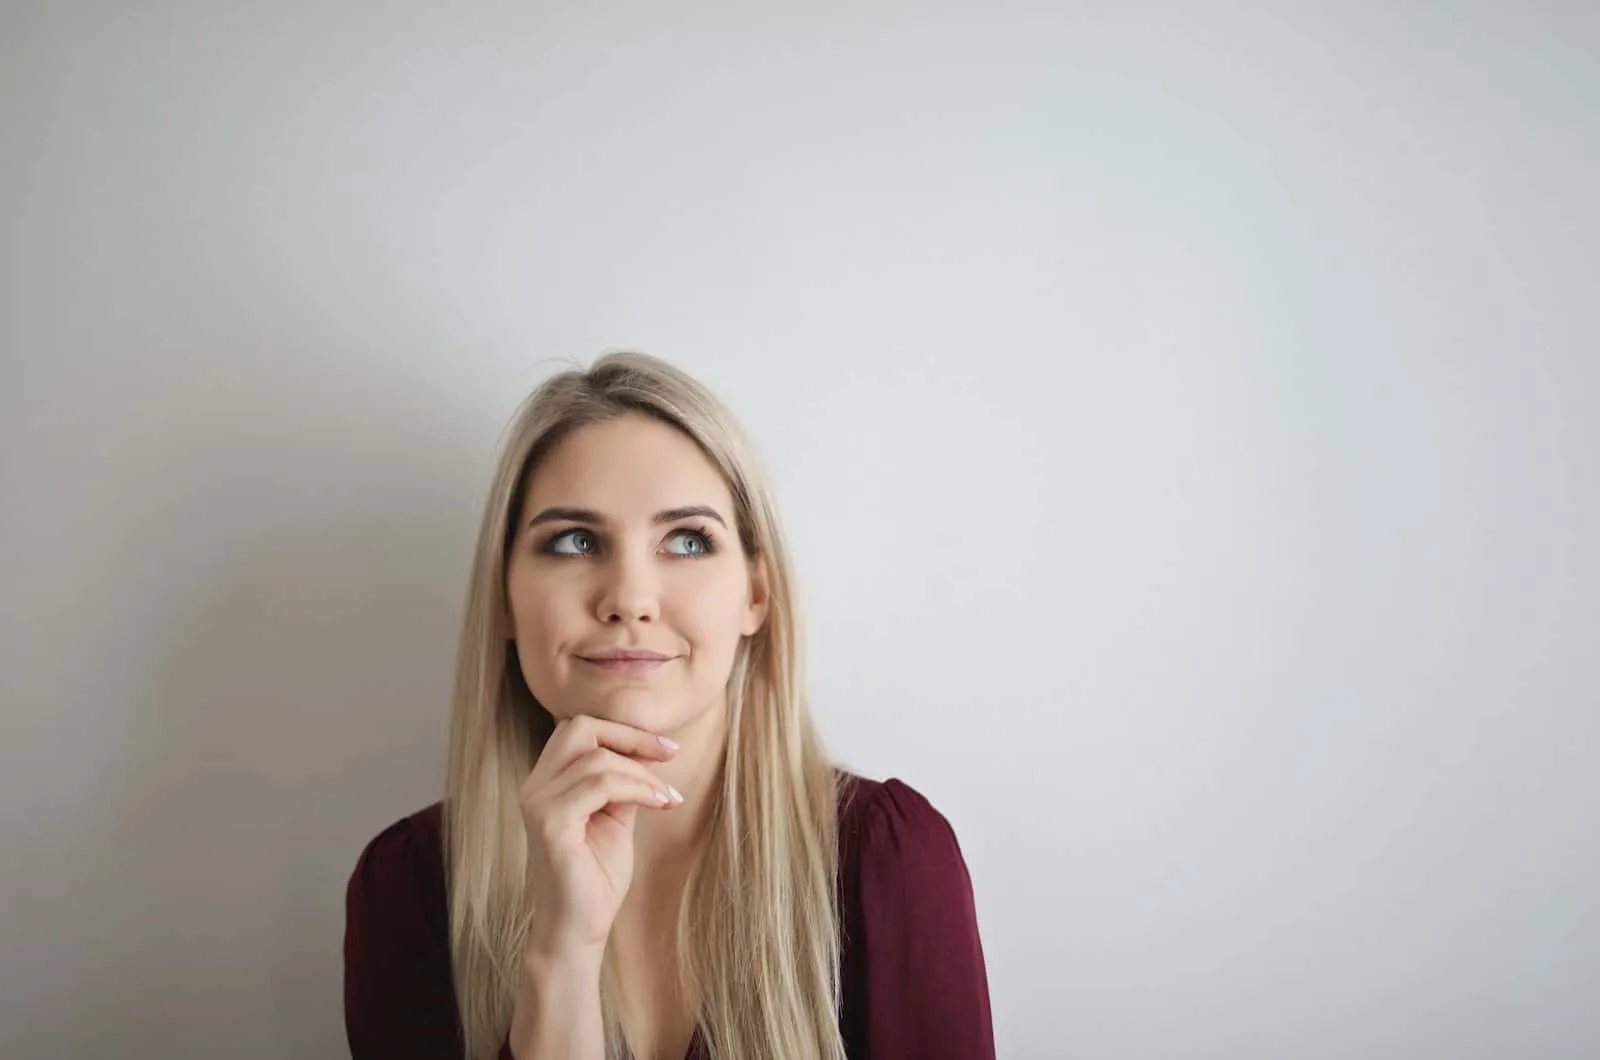 woman thinking about how to say sorry to her boyfriend in a romantic way